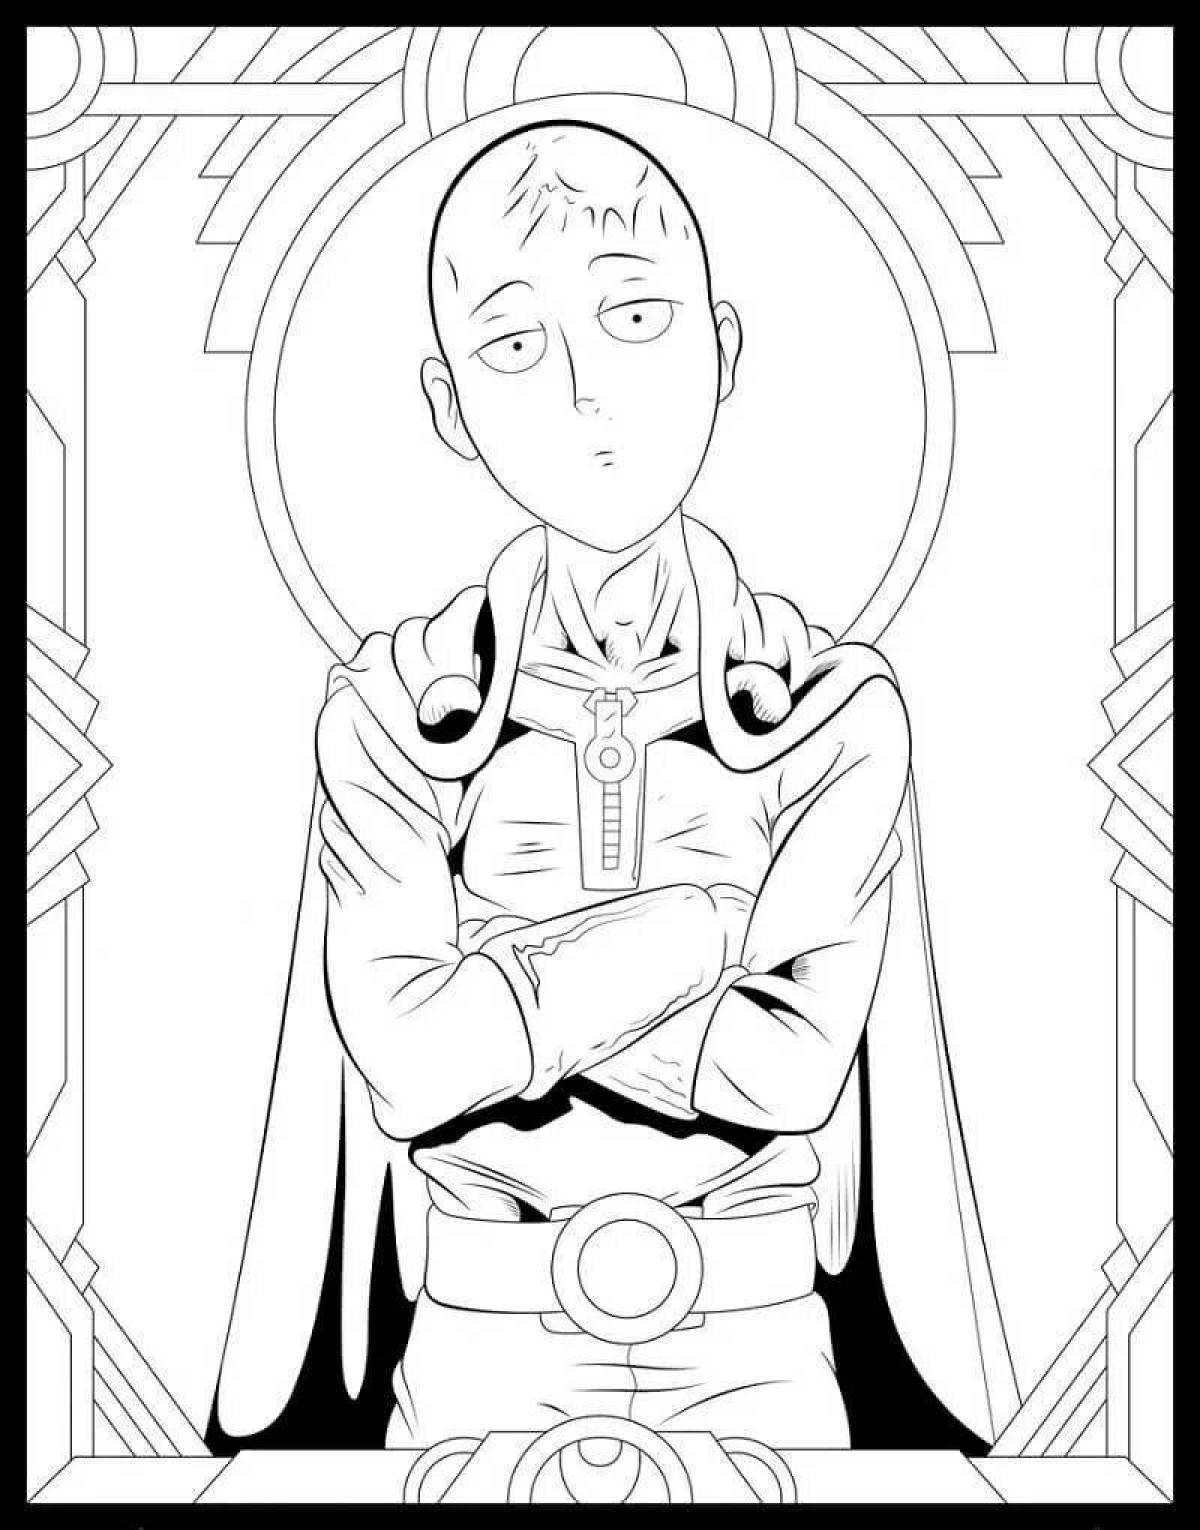 Charming one-punchman coloring page